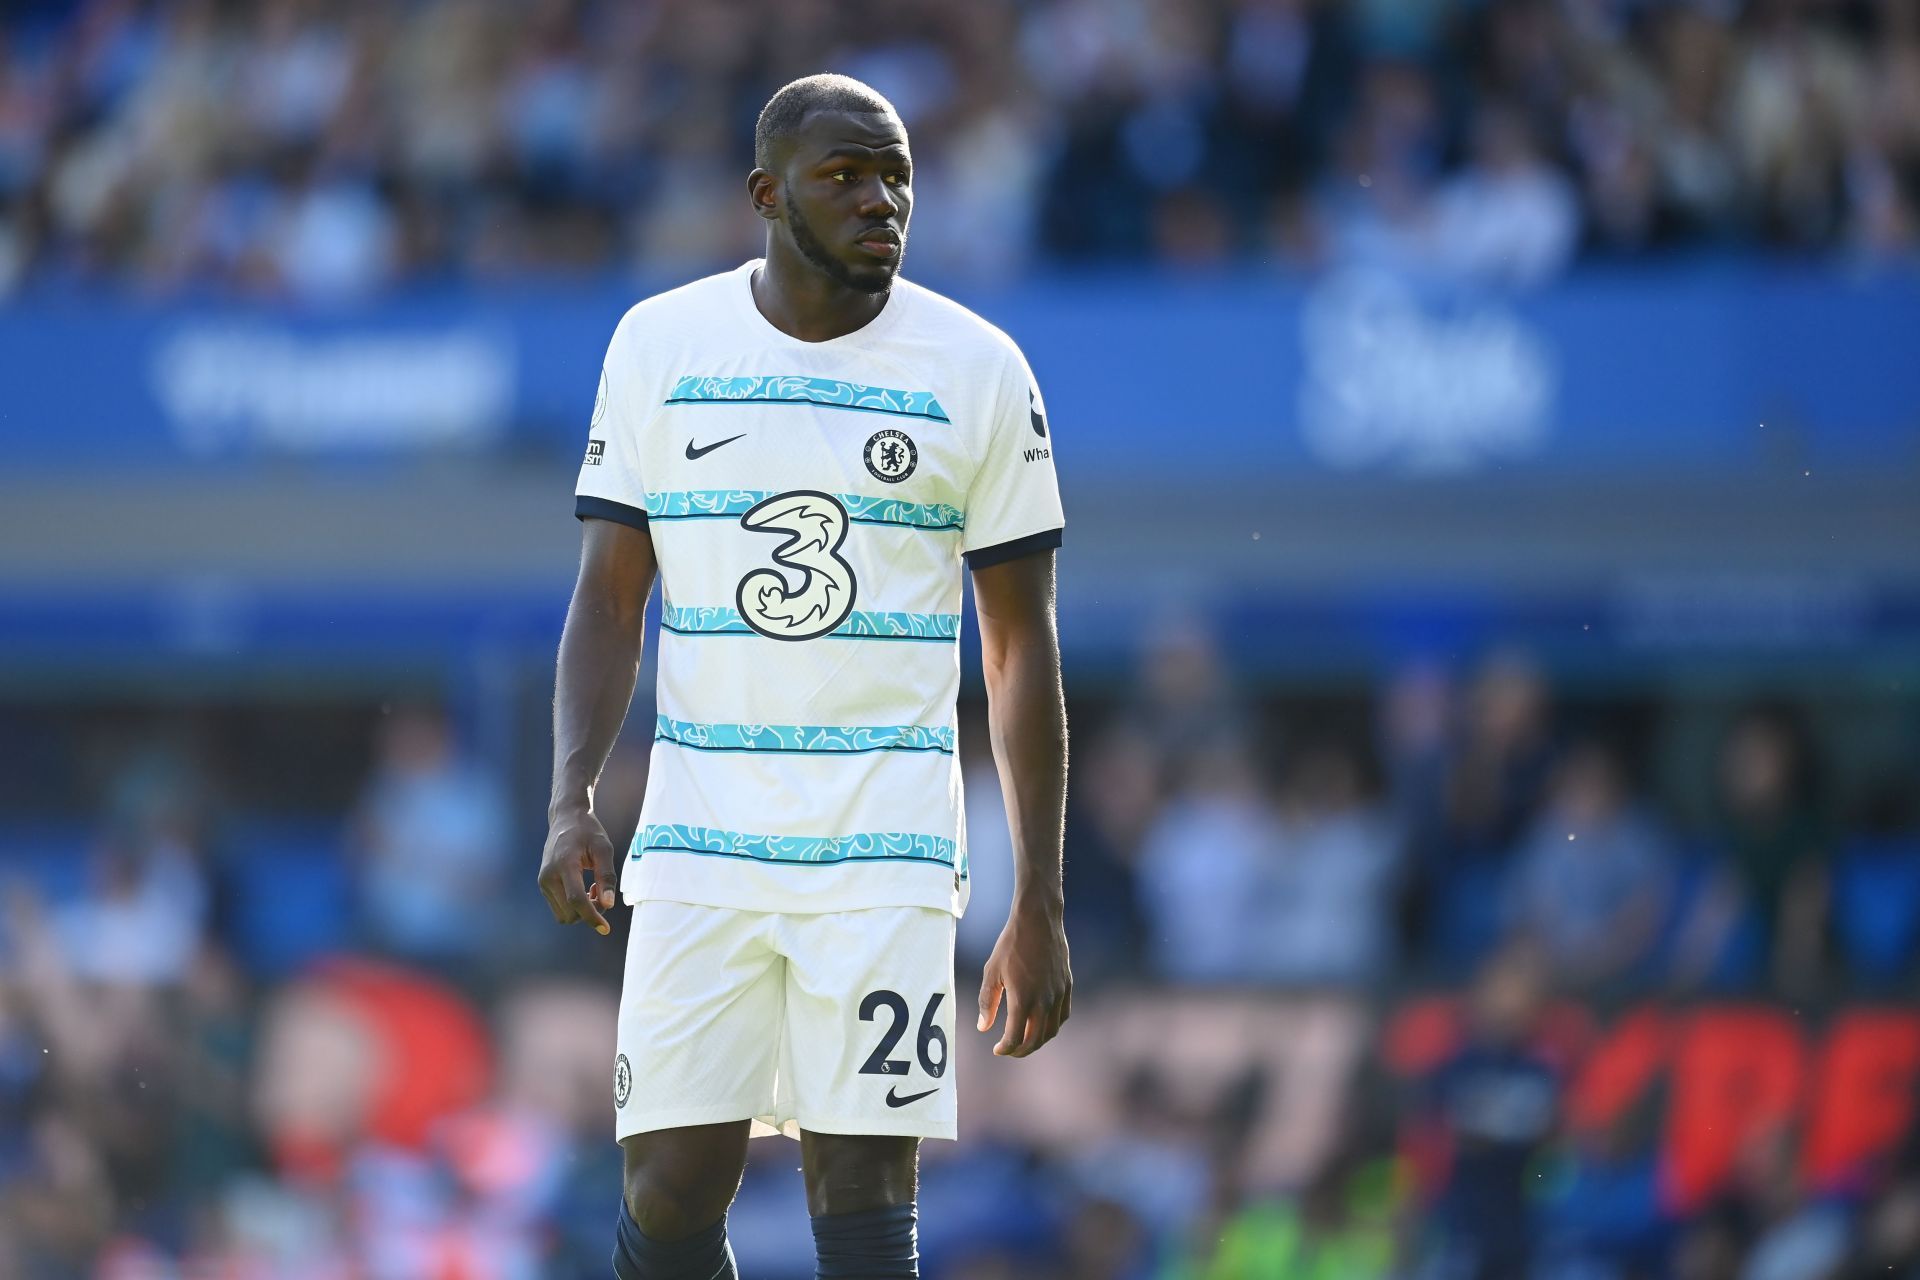 Koulibaly made his Premier League debut against Everton